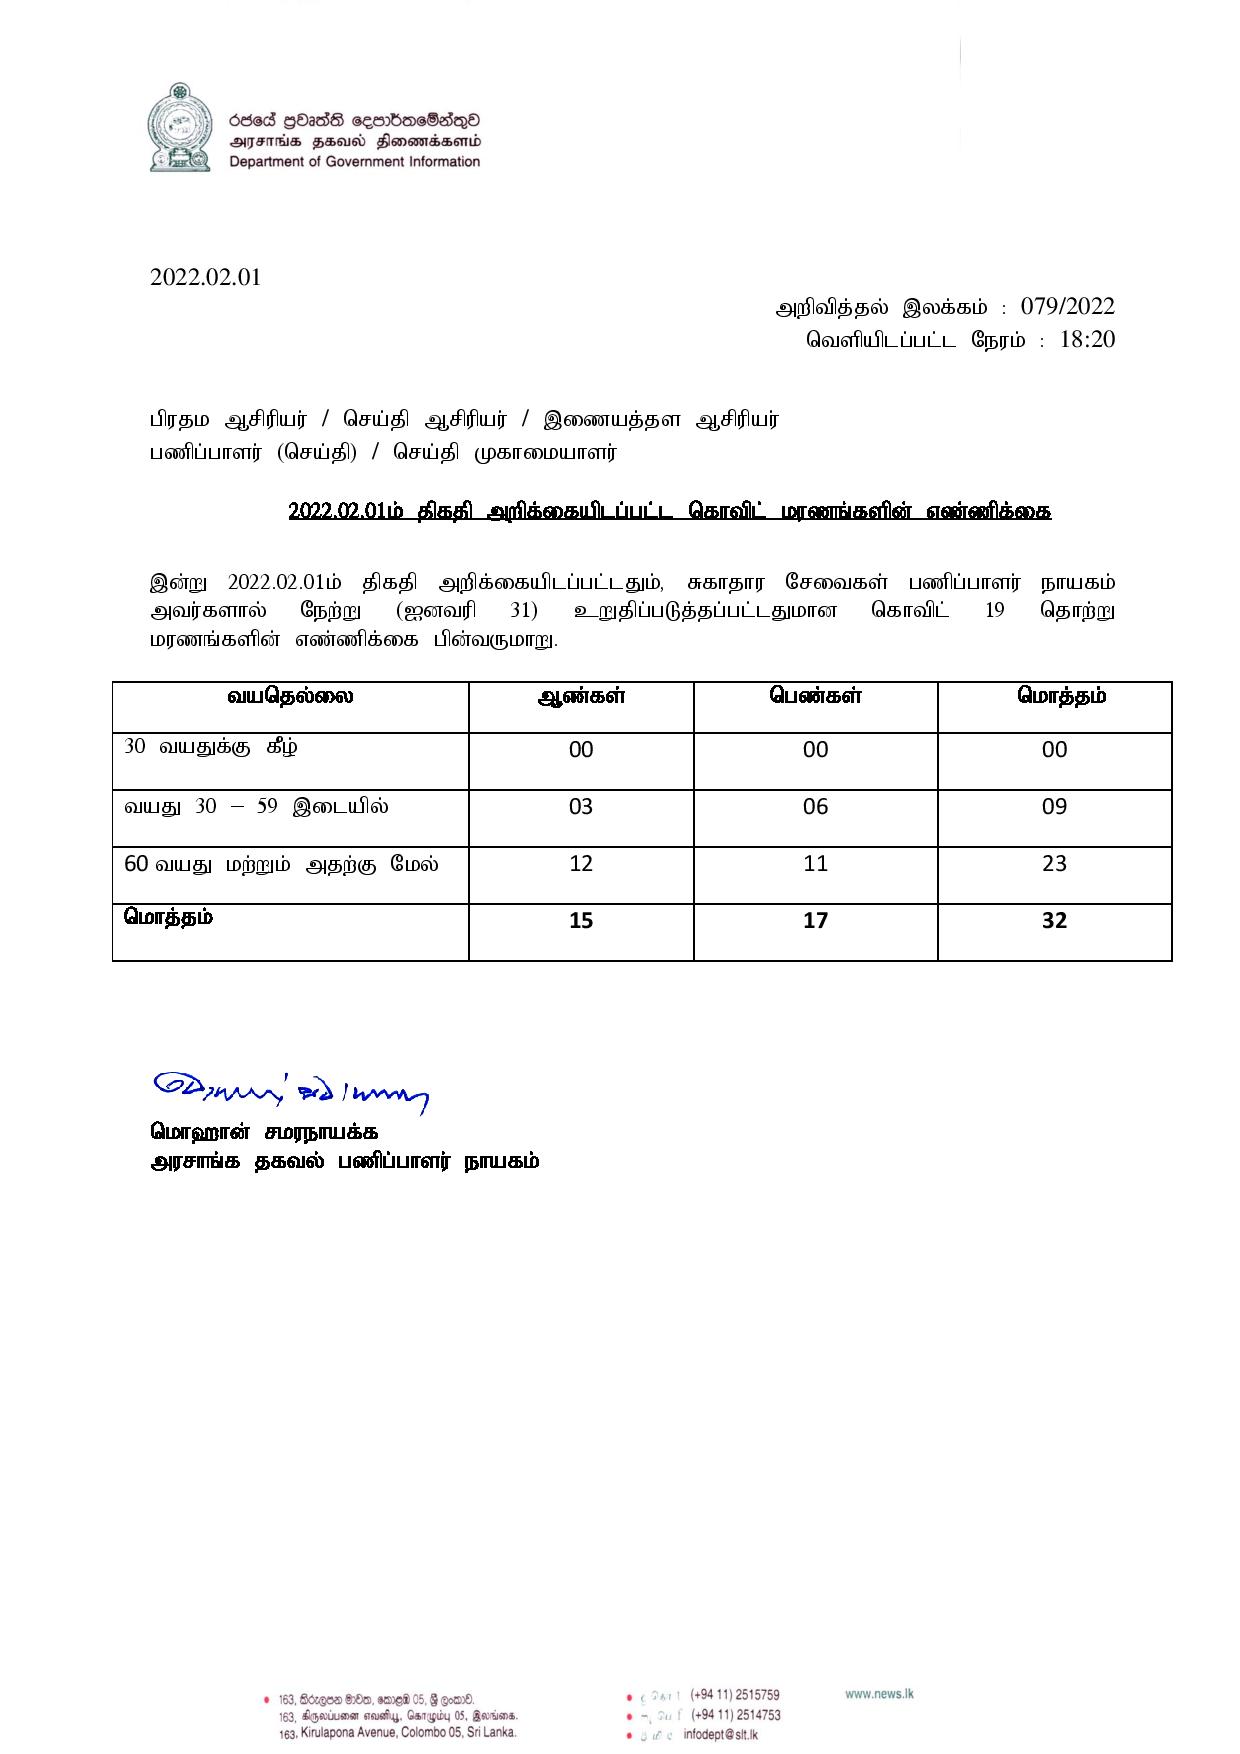 Press Release 79 Tamil page 001